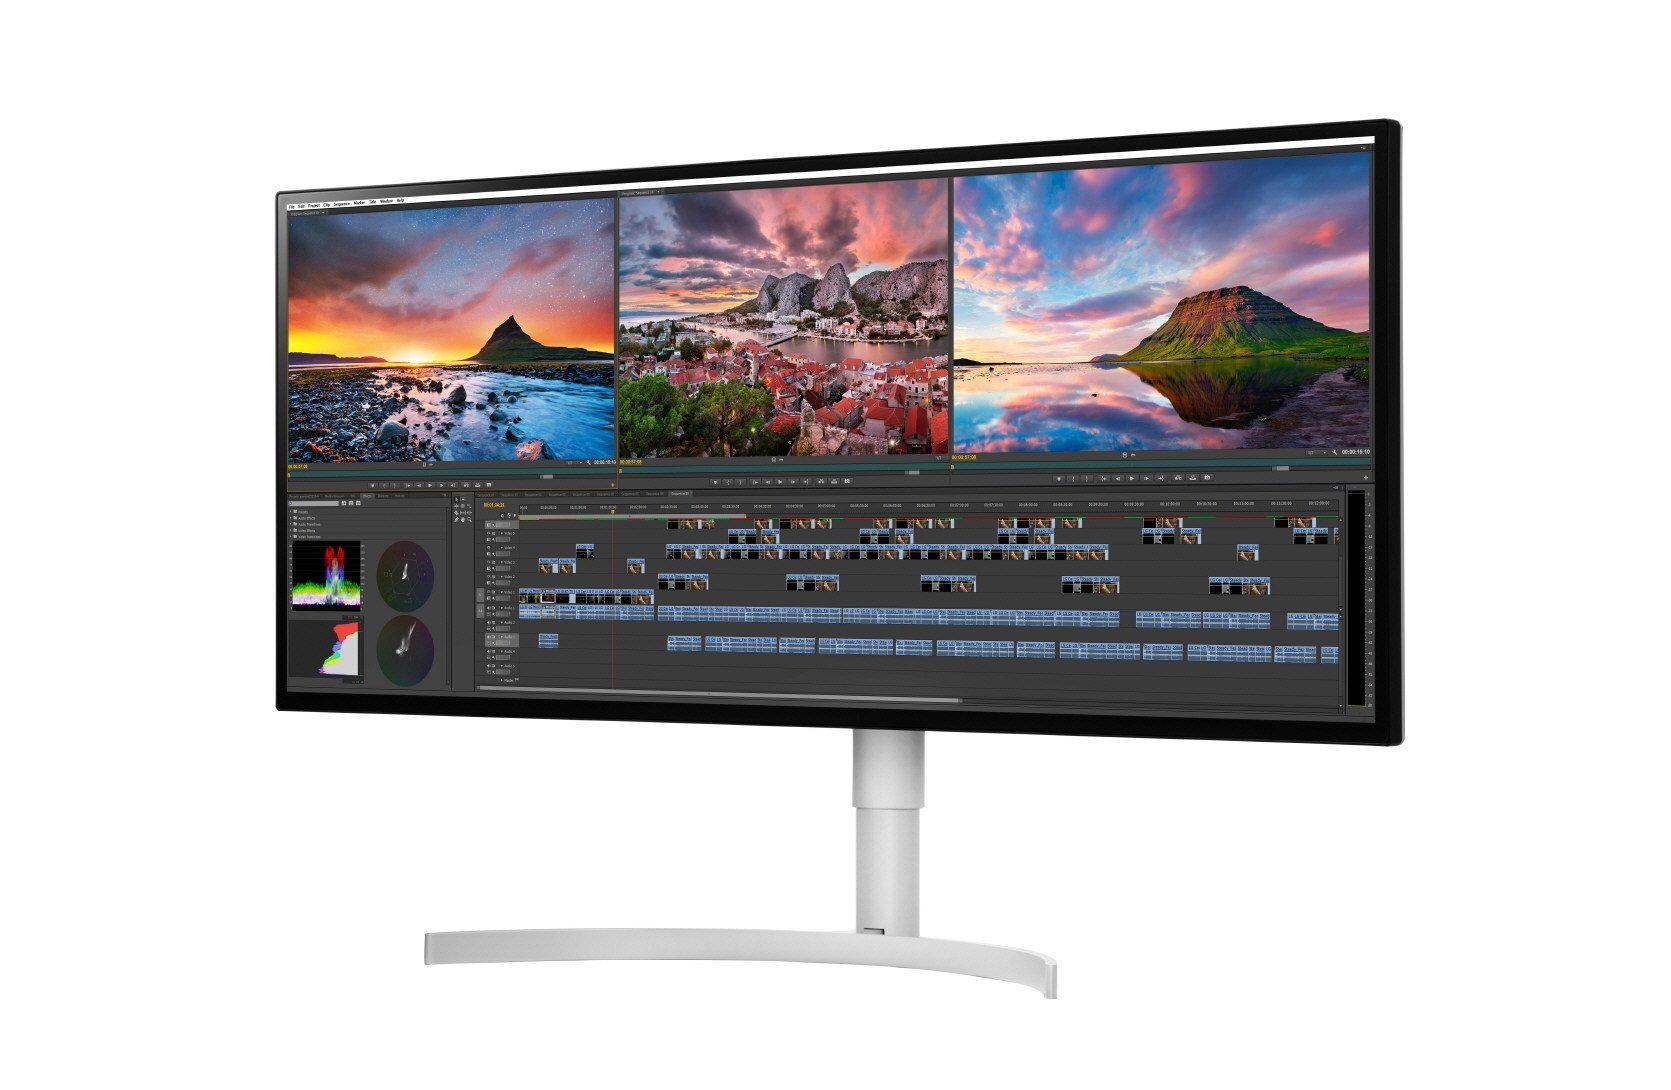 The 5K Ultrawide monitor form LG is a MacBook Pro owner's dream display.